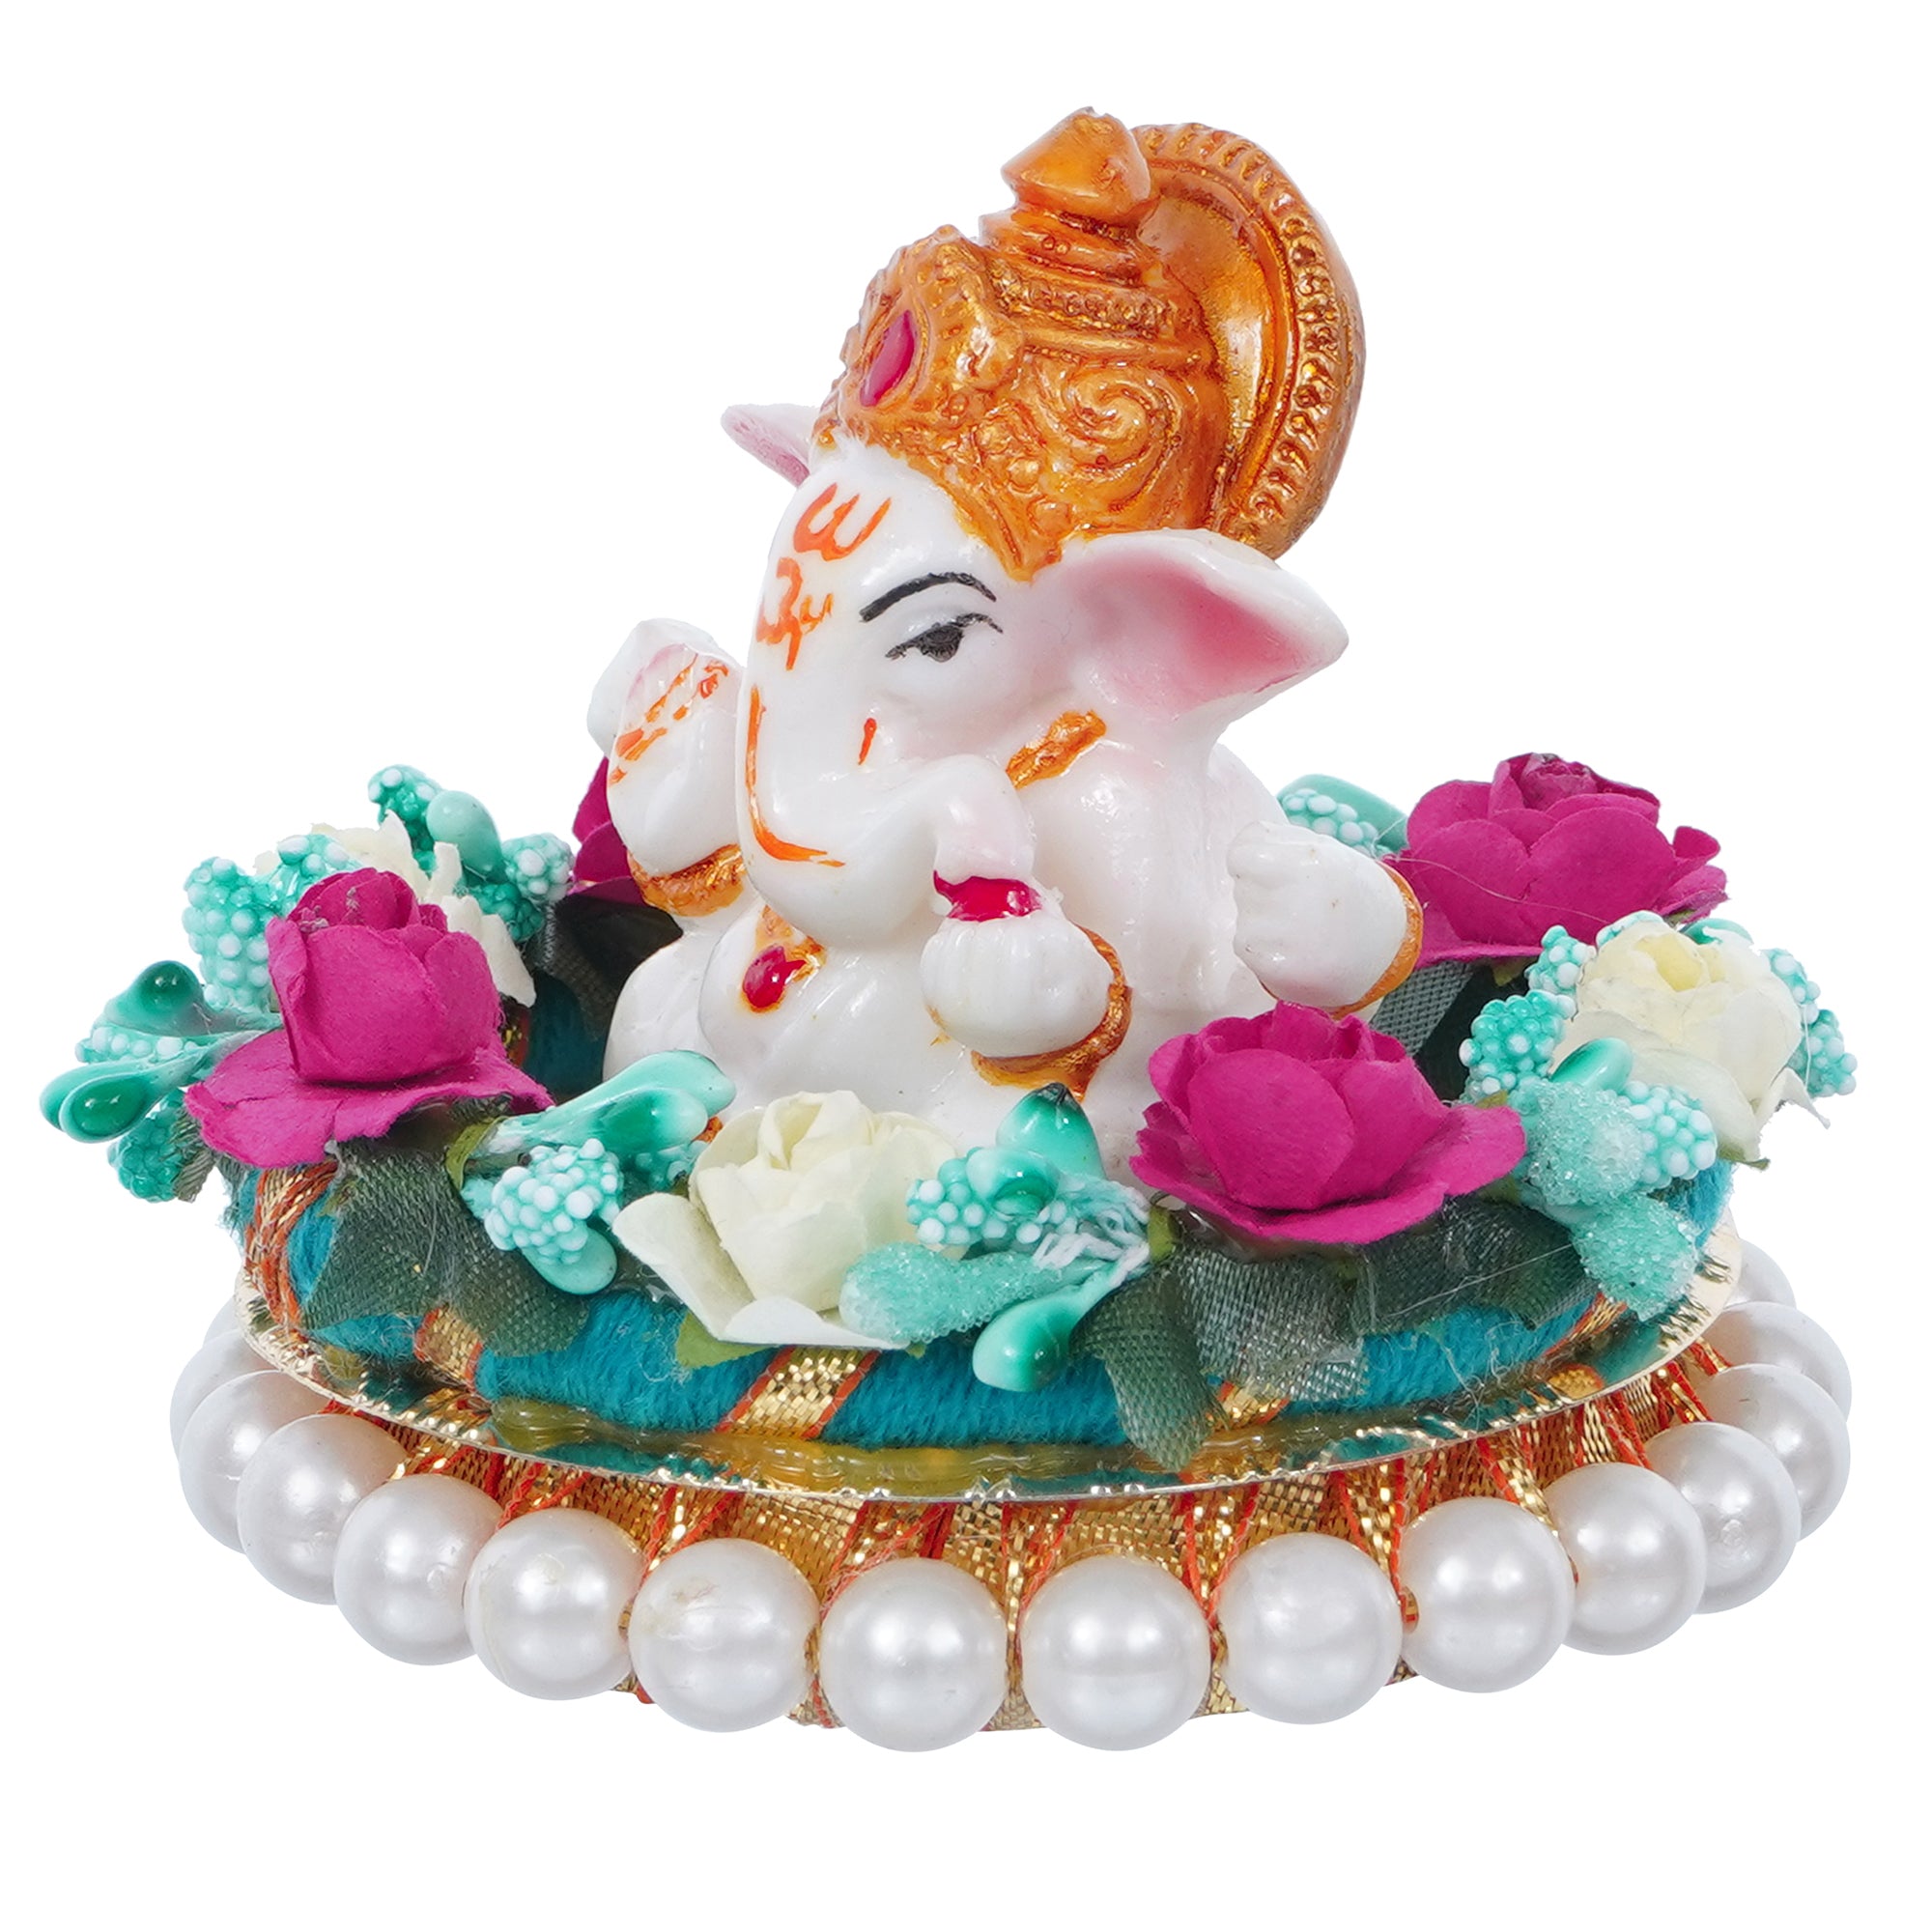 Lord Ganesha Idol on Decorative Handcrafted Plate with Colorful Flowers 5